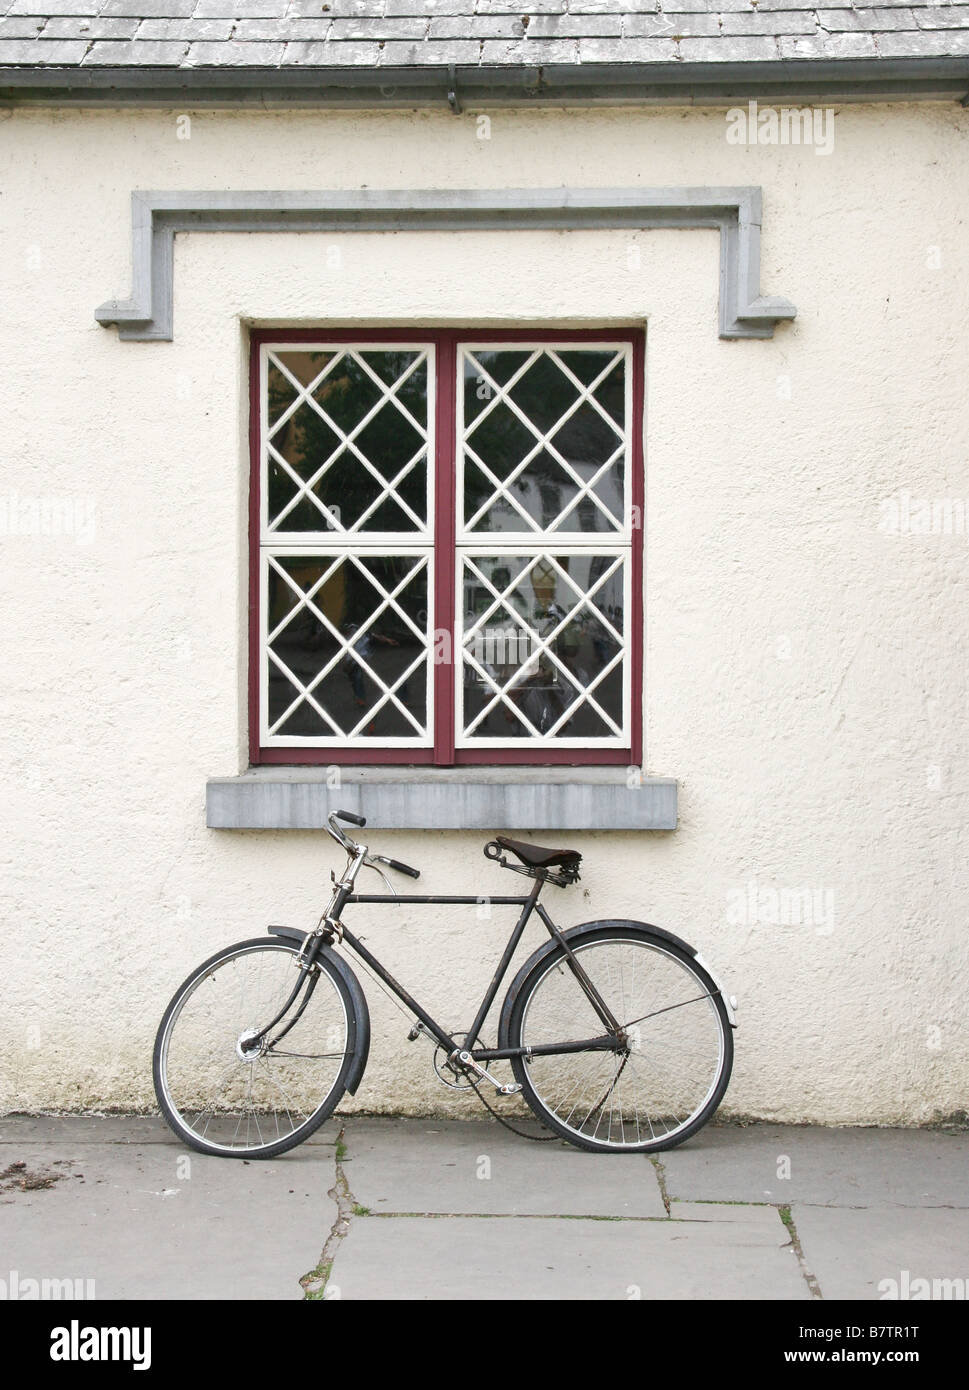 Bicycle in front of window at schoolhouse at Bunratty Folk Park, County Clare, Ireland Stock Photo